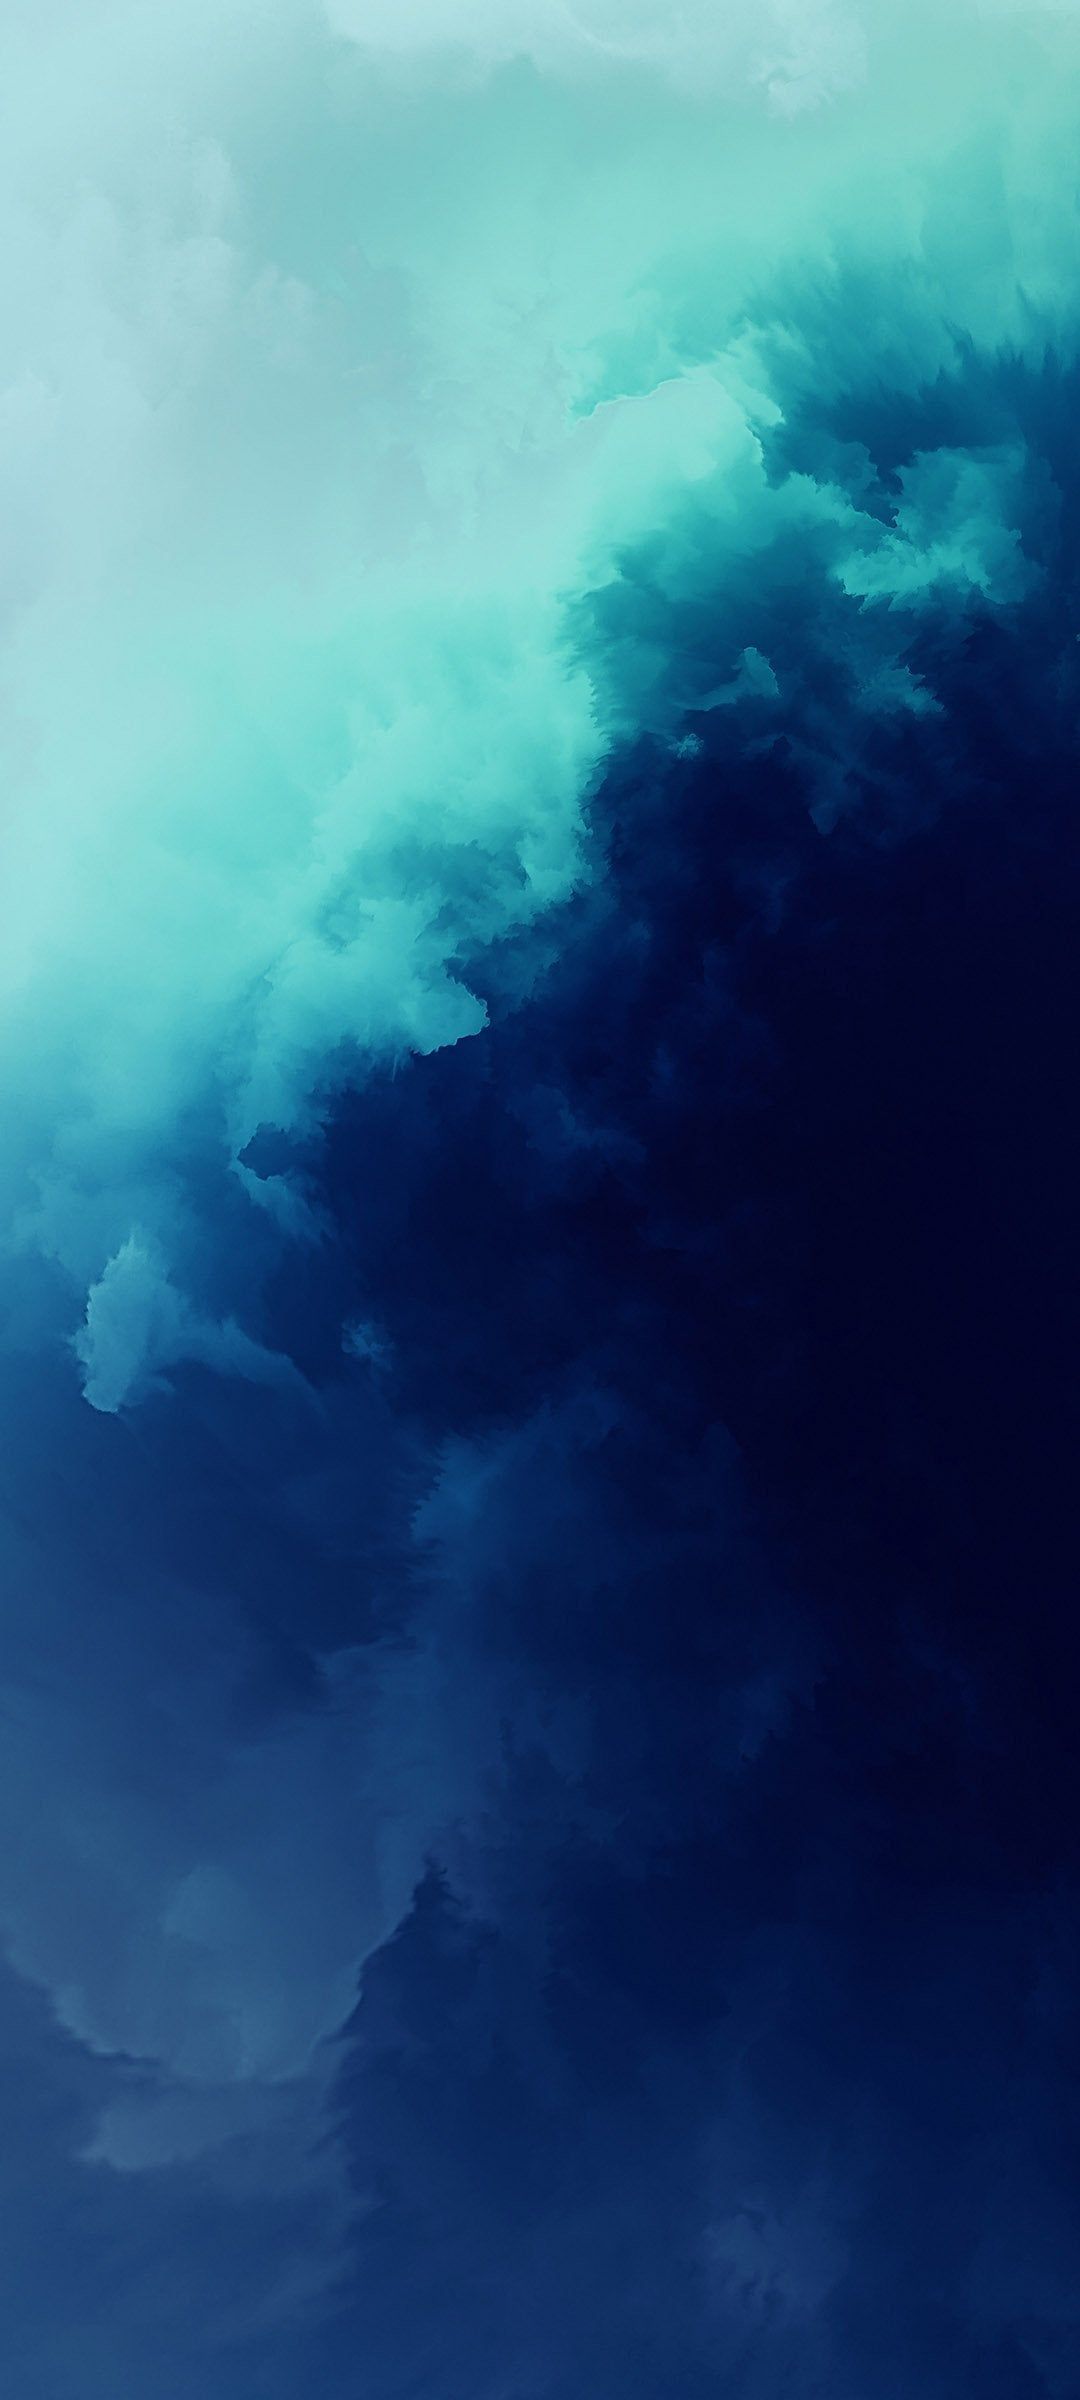 Could Anyone Help Me Get The MP4 Of This OnePlus 7T 7T Pro Live Wallpaper?